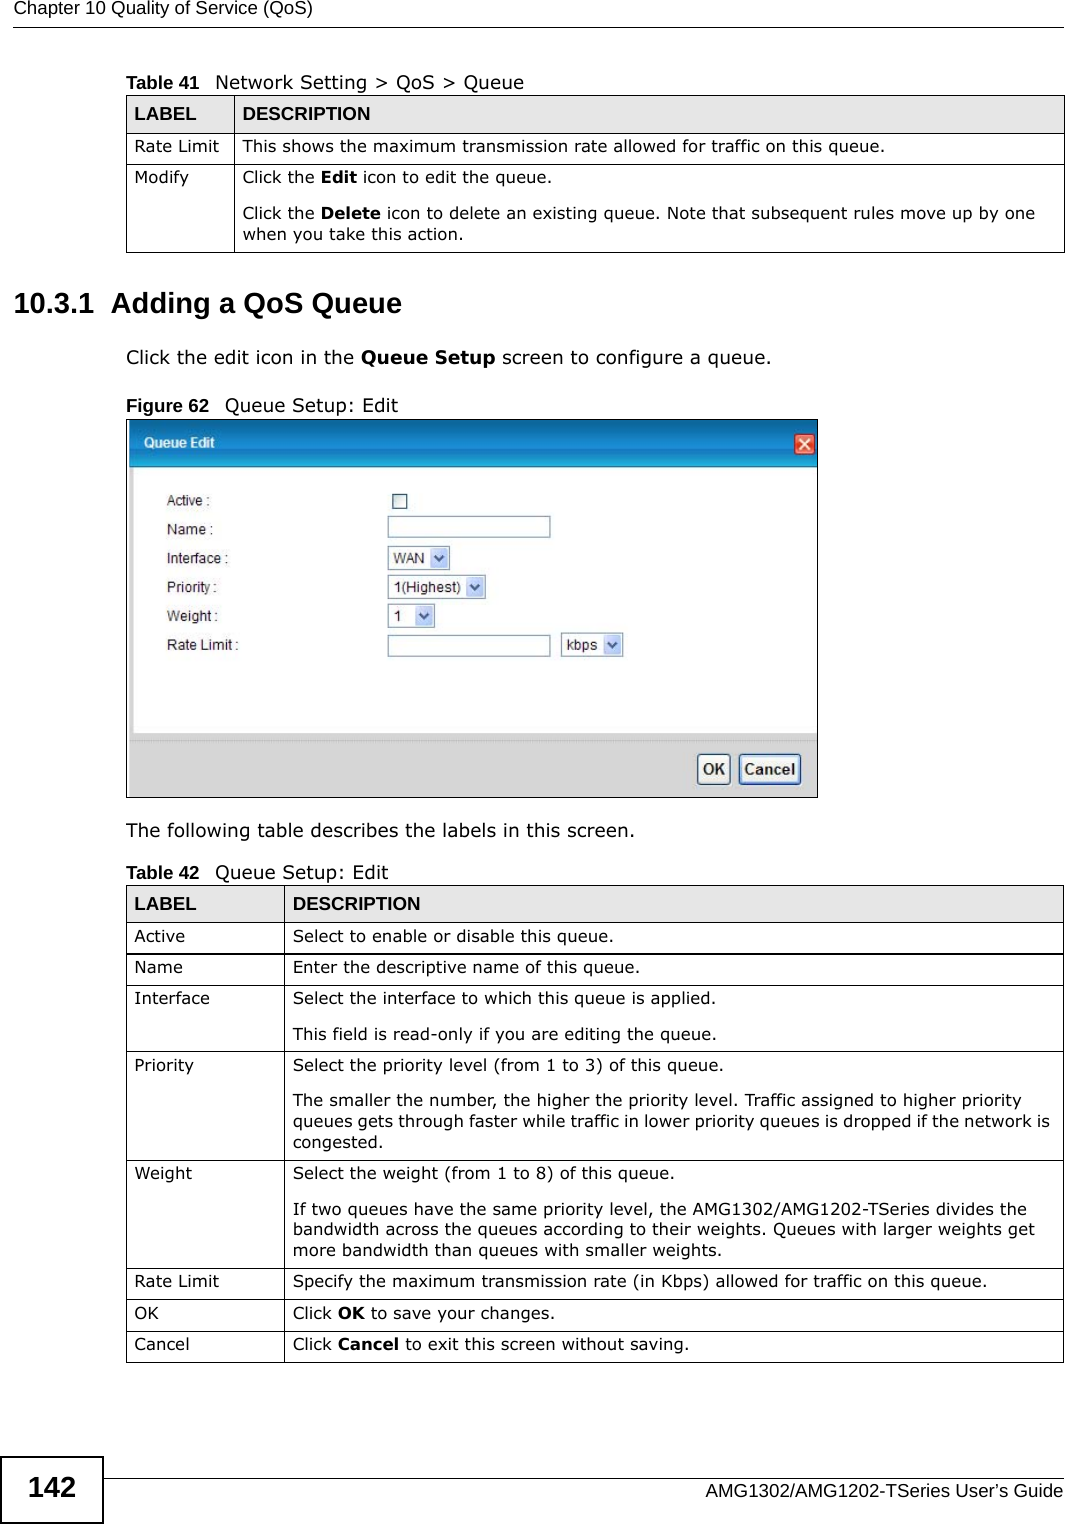 Chapter 10 Quality of Service (QoS)AMG1302/AMG1202-TSeries User’s Guide14210.3.1  Adding a QoS Queue Click the edit icon in the Queue Setup screen to configure a queue. Figure 62   Queue Setup: Edit The following table describes the labels in this screen.  Rate Limit This shows the maximum transmission rate allowed for traffic on this queue.Modify Click the Edit icon to edit the queue.Click the Delete icon to delete an existing queue. Note that subsequent rules move up by one when you take this action.Table 41   Network Setting &gt; QoS &gt; QueueLABEL DESCRIPTIONTable 42   Queue Setup: EditLABEL DESCRIPTIONActive Select to enable or disable this queue.Name Enter the descriptive name of this queue.Interface Select the interface to which this queue is applied.This field is read-only if you are editing the queue.Priority Select the priority level (from 1 to 3) of this queue.The smaller the number, the higher the priority level. Traffic assigned to higher priority queues gets through faster while traffic in lower priority queues is dropped if the network is congested.Weight Select the weight (from 1 to 8) of this queue. If two queues have the same priority level, the AMG1302/AMG1202-TSeries divides the bandwidth across the queues according to their weights. Queues with larger weights get more bandwidth than queues with smaller weights.Rate Limit Specify the maximum transmission rate (in Kbps) allowed for traffic on this queue.OK Click OK to save your changes.Cancel Click Cancel to exit this screen without saving.